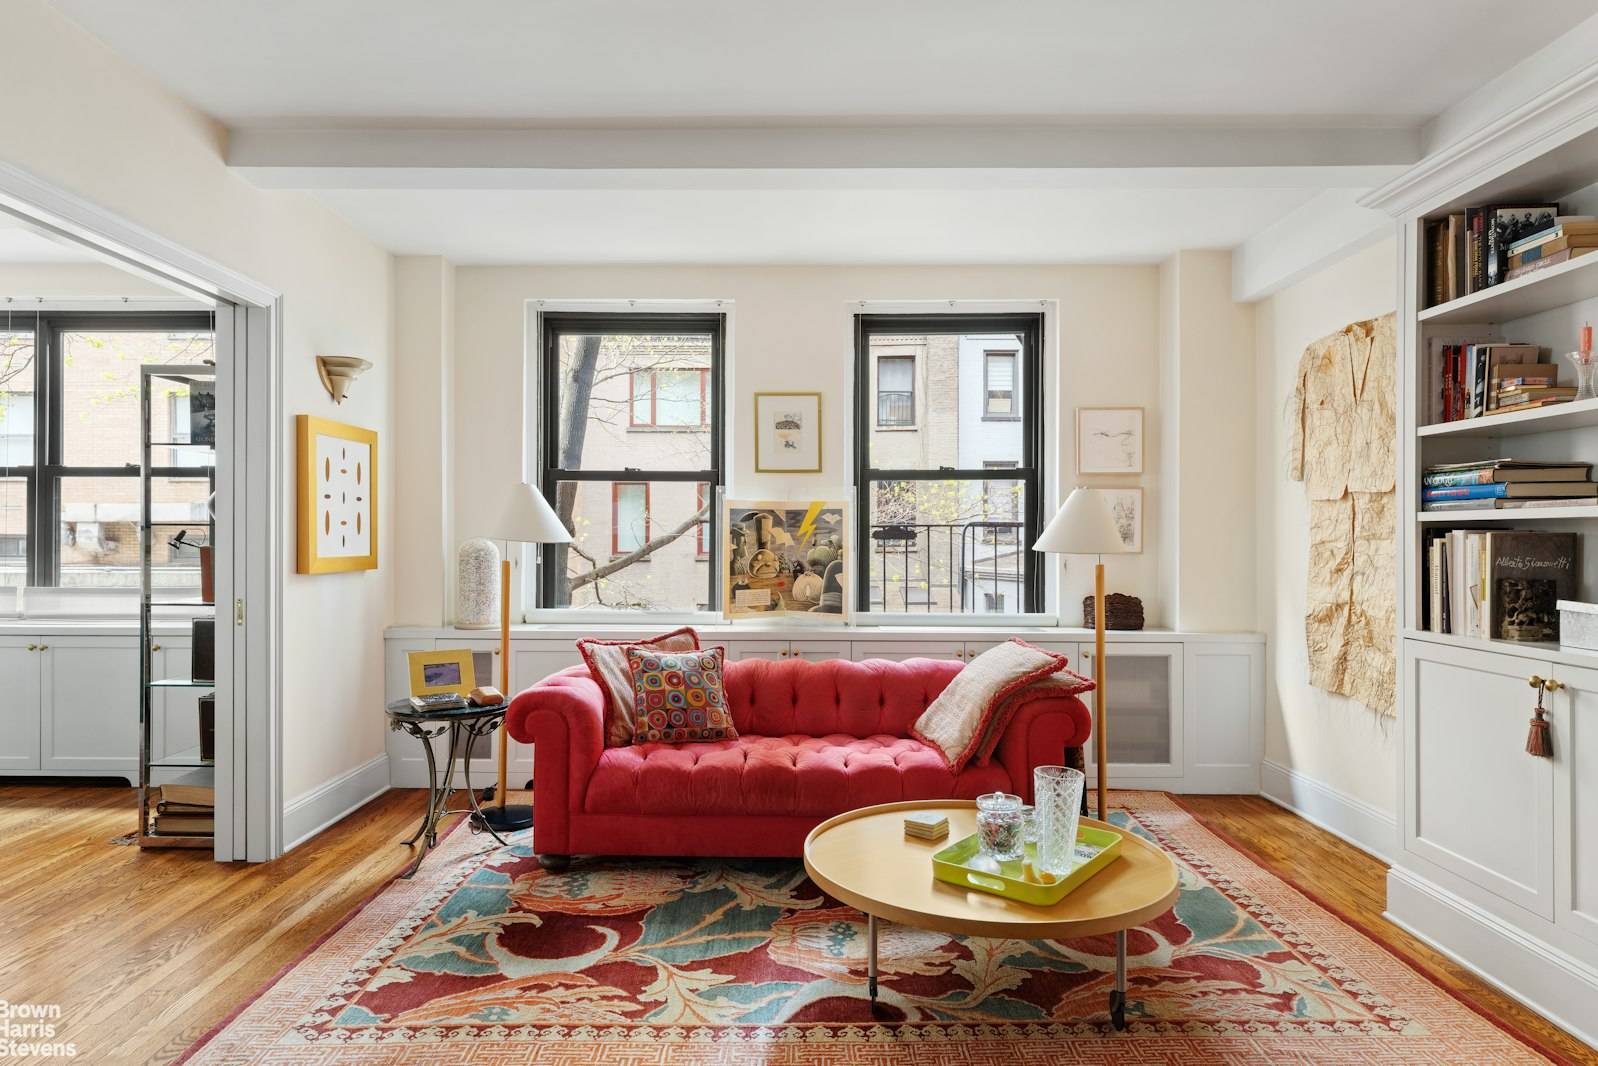 Welcome to Residence 4GH at 210 East 73rd Street a gracious and expansive 2 bedroom, 2 bathroom pre war home situated on one of the prettiest blocks in the city ...